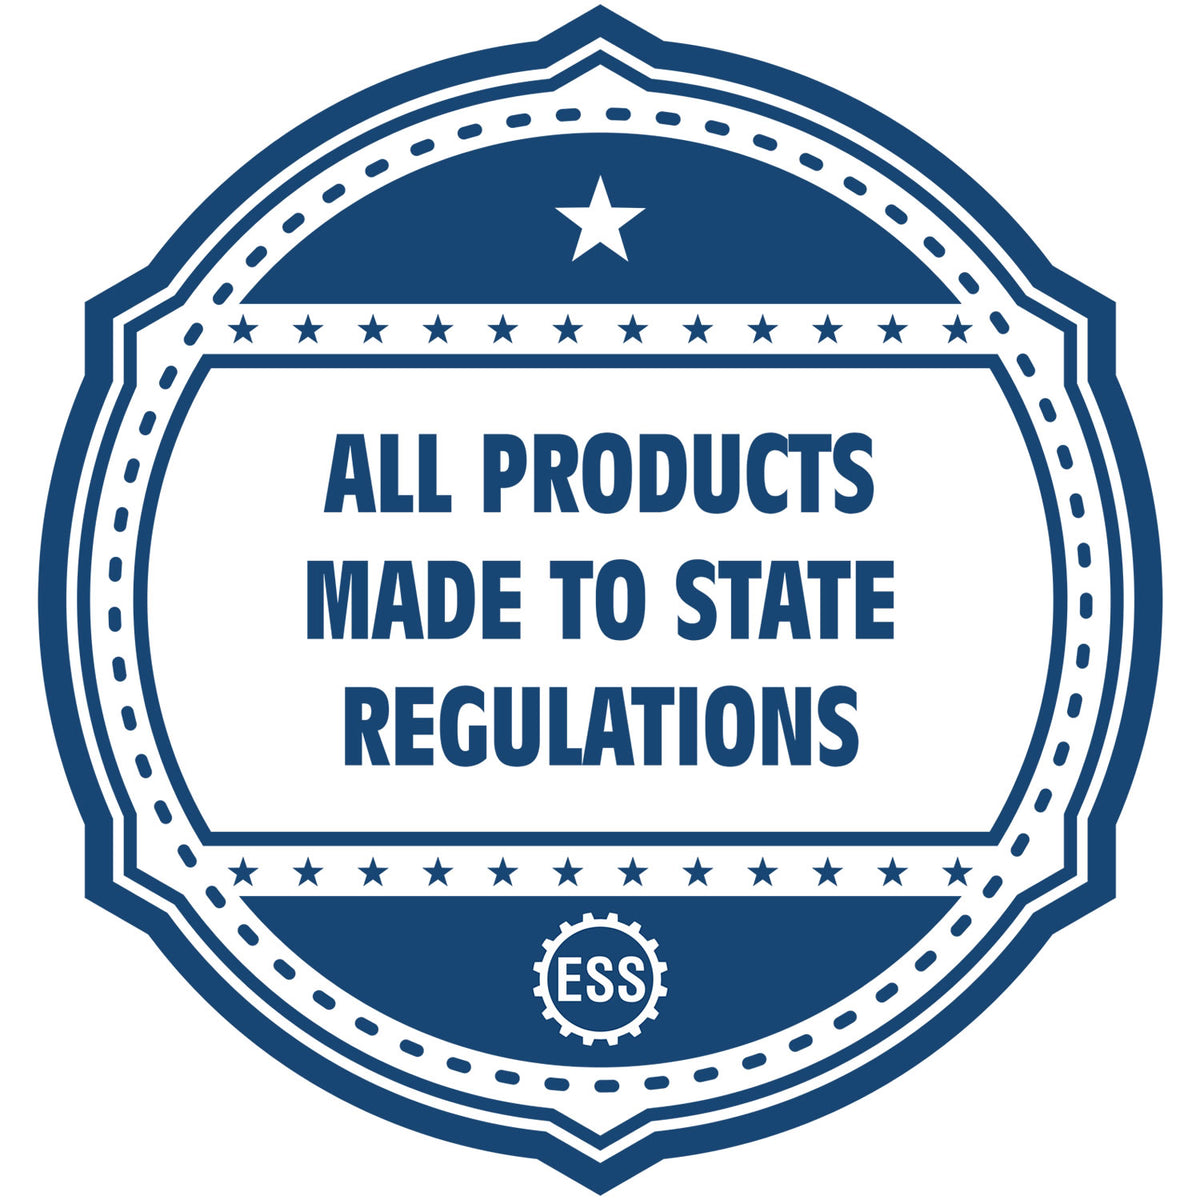 An icon or badge element for the Slim Pre-Inked North Carolina Landscape Architect Seal Stamp showing that this product is made in compliance with state regulations.